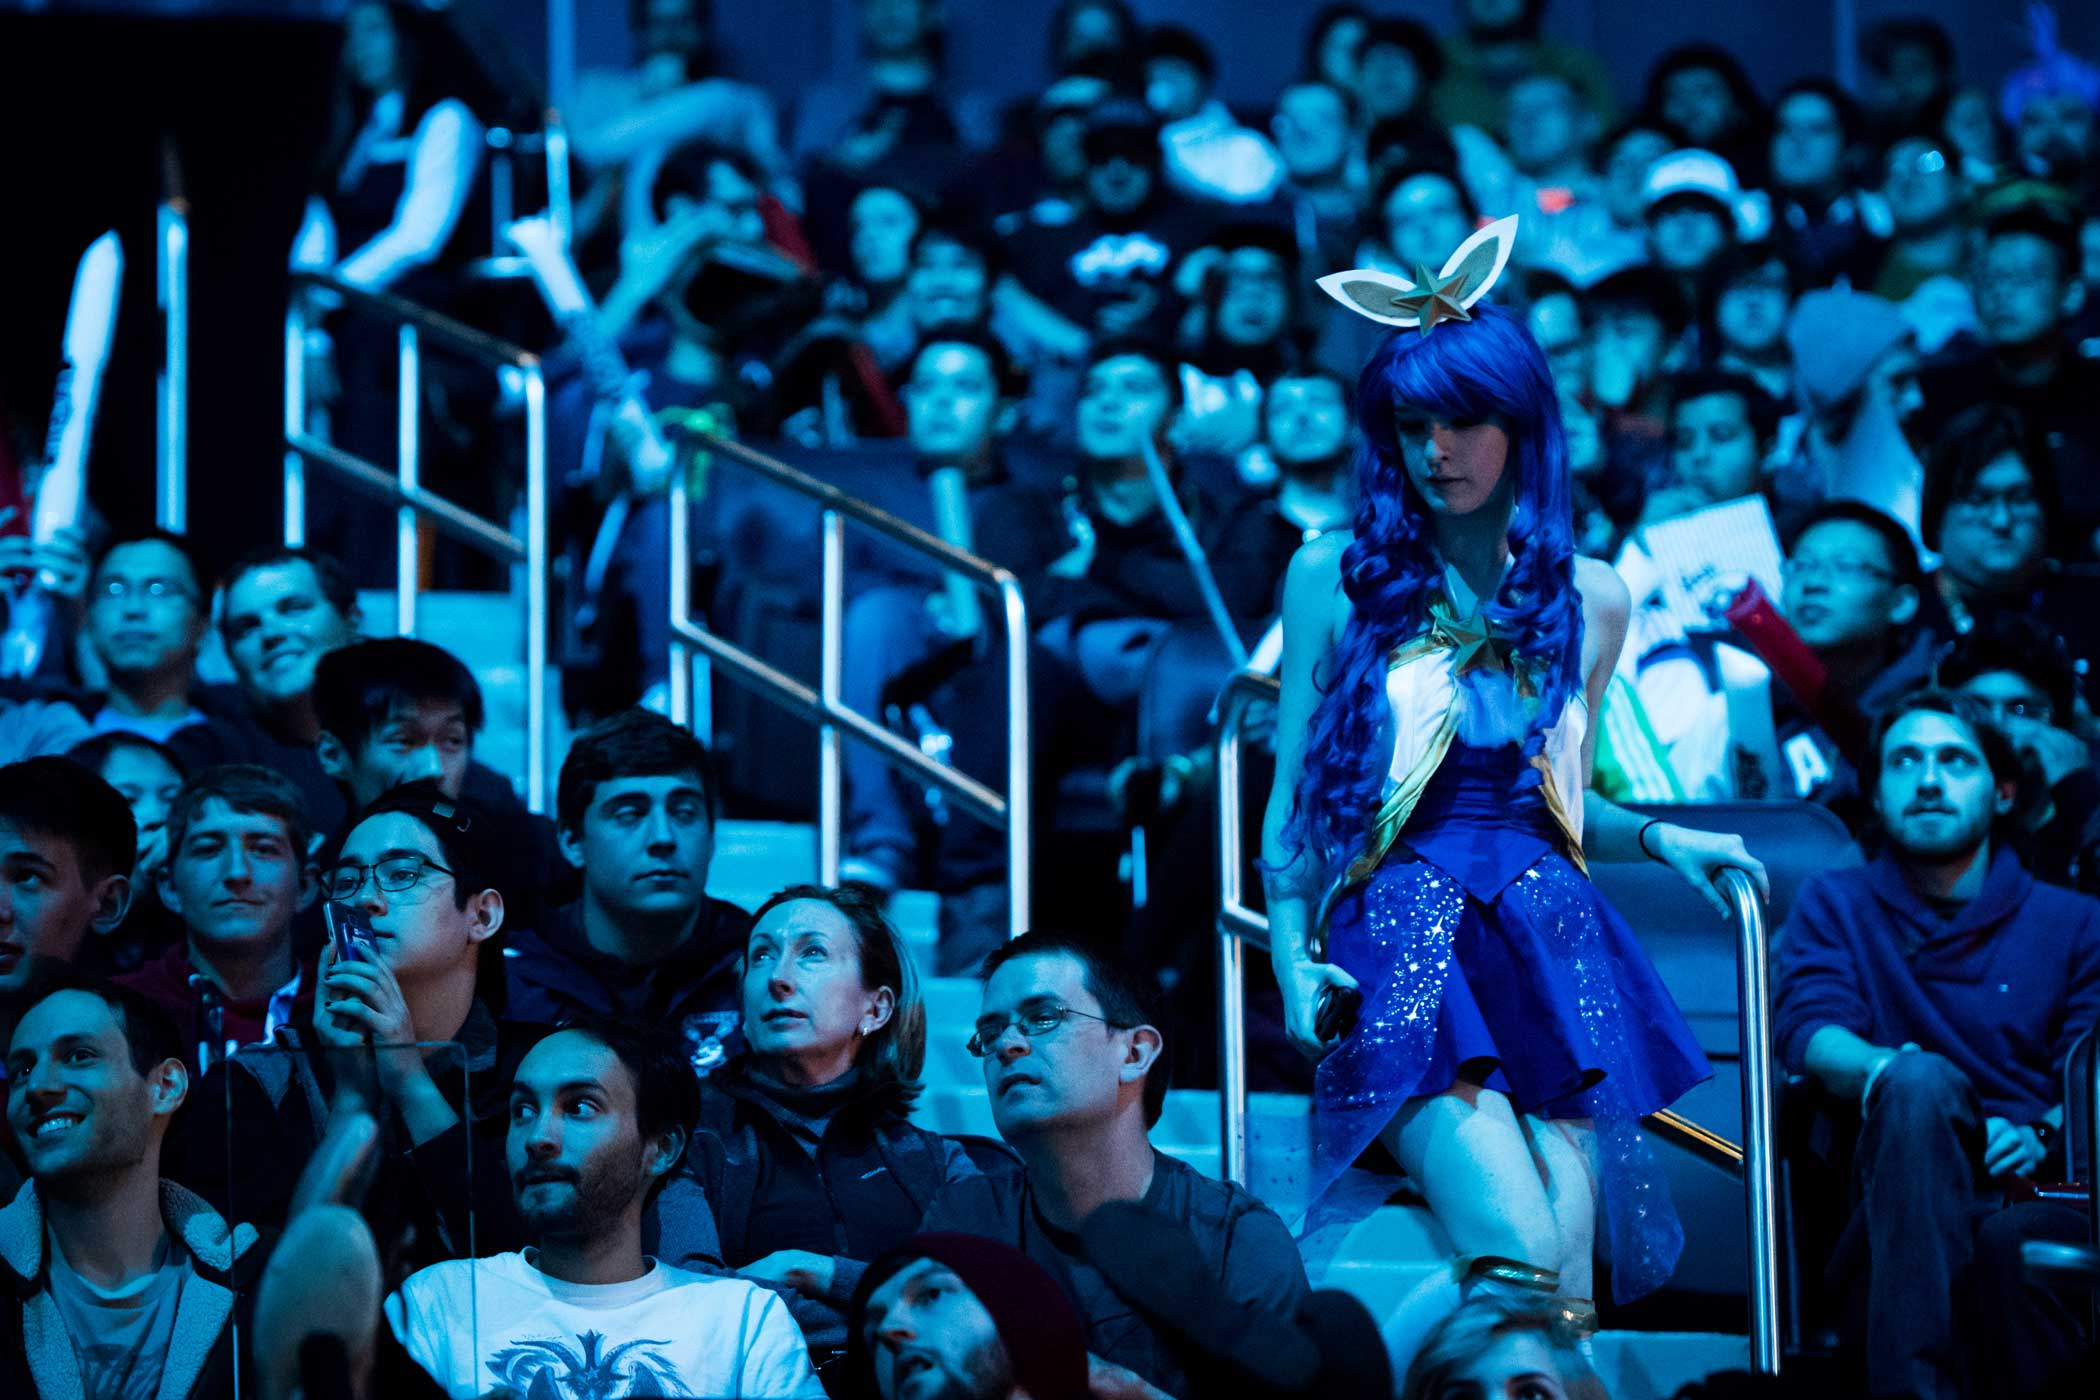 A League of Legends fan wearing a cosplay outfit heads to her seat in Madison Square Garden. Mark Kauzlarich for TIME